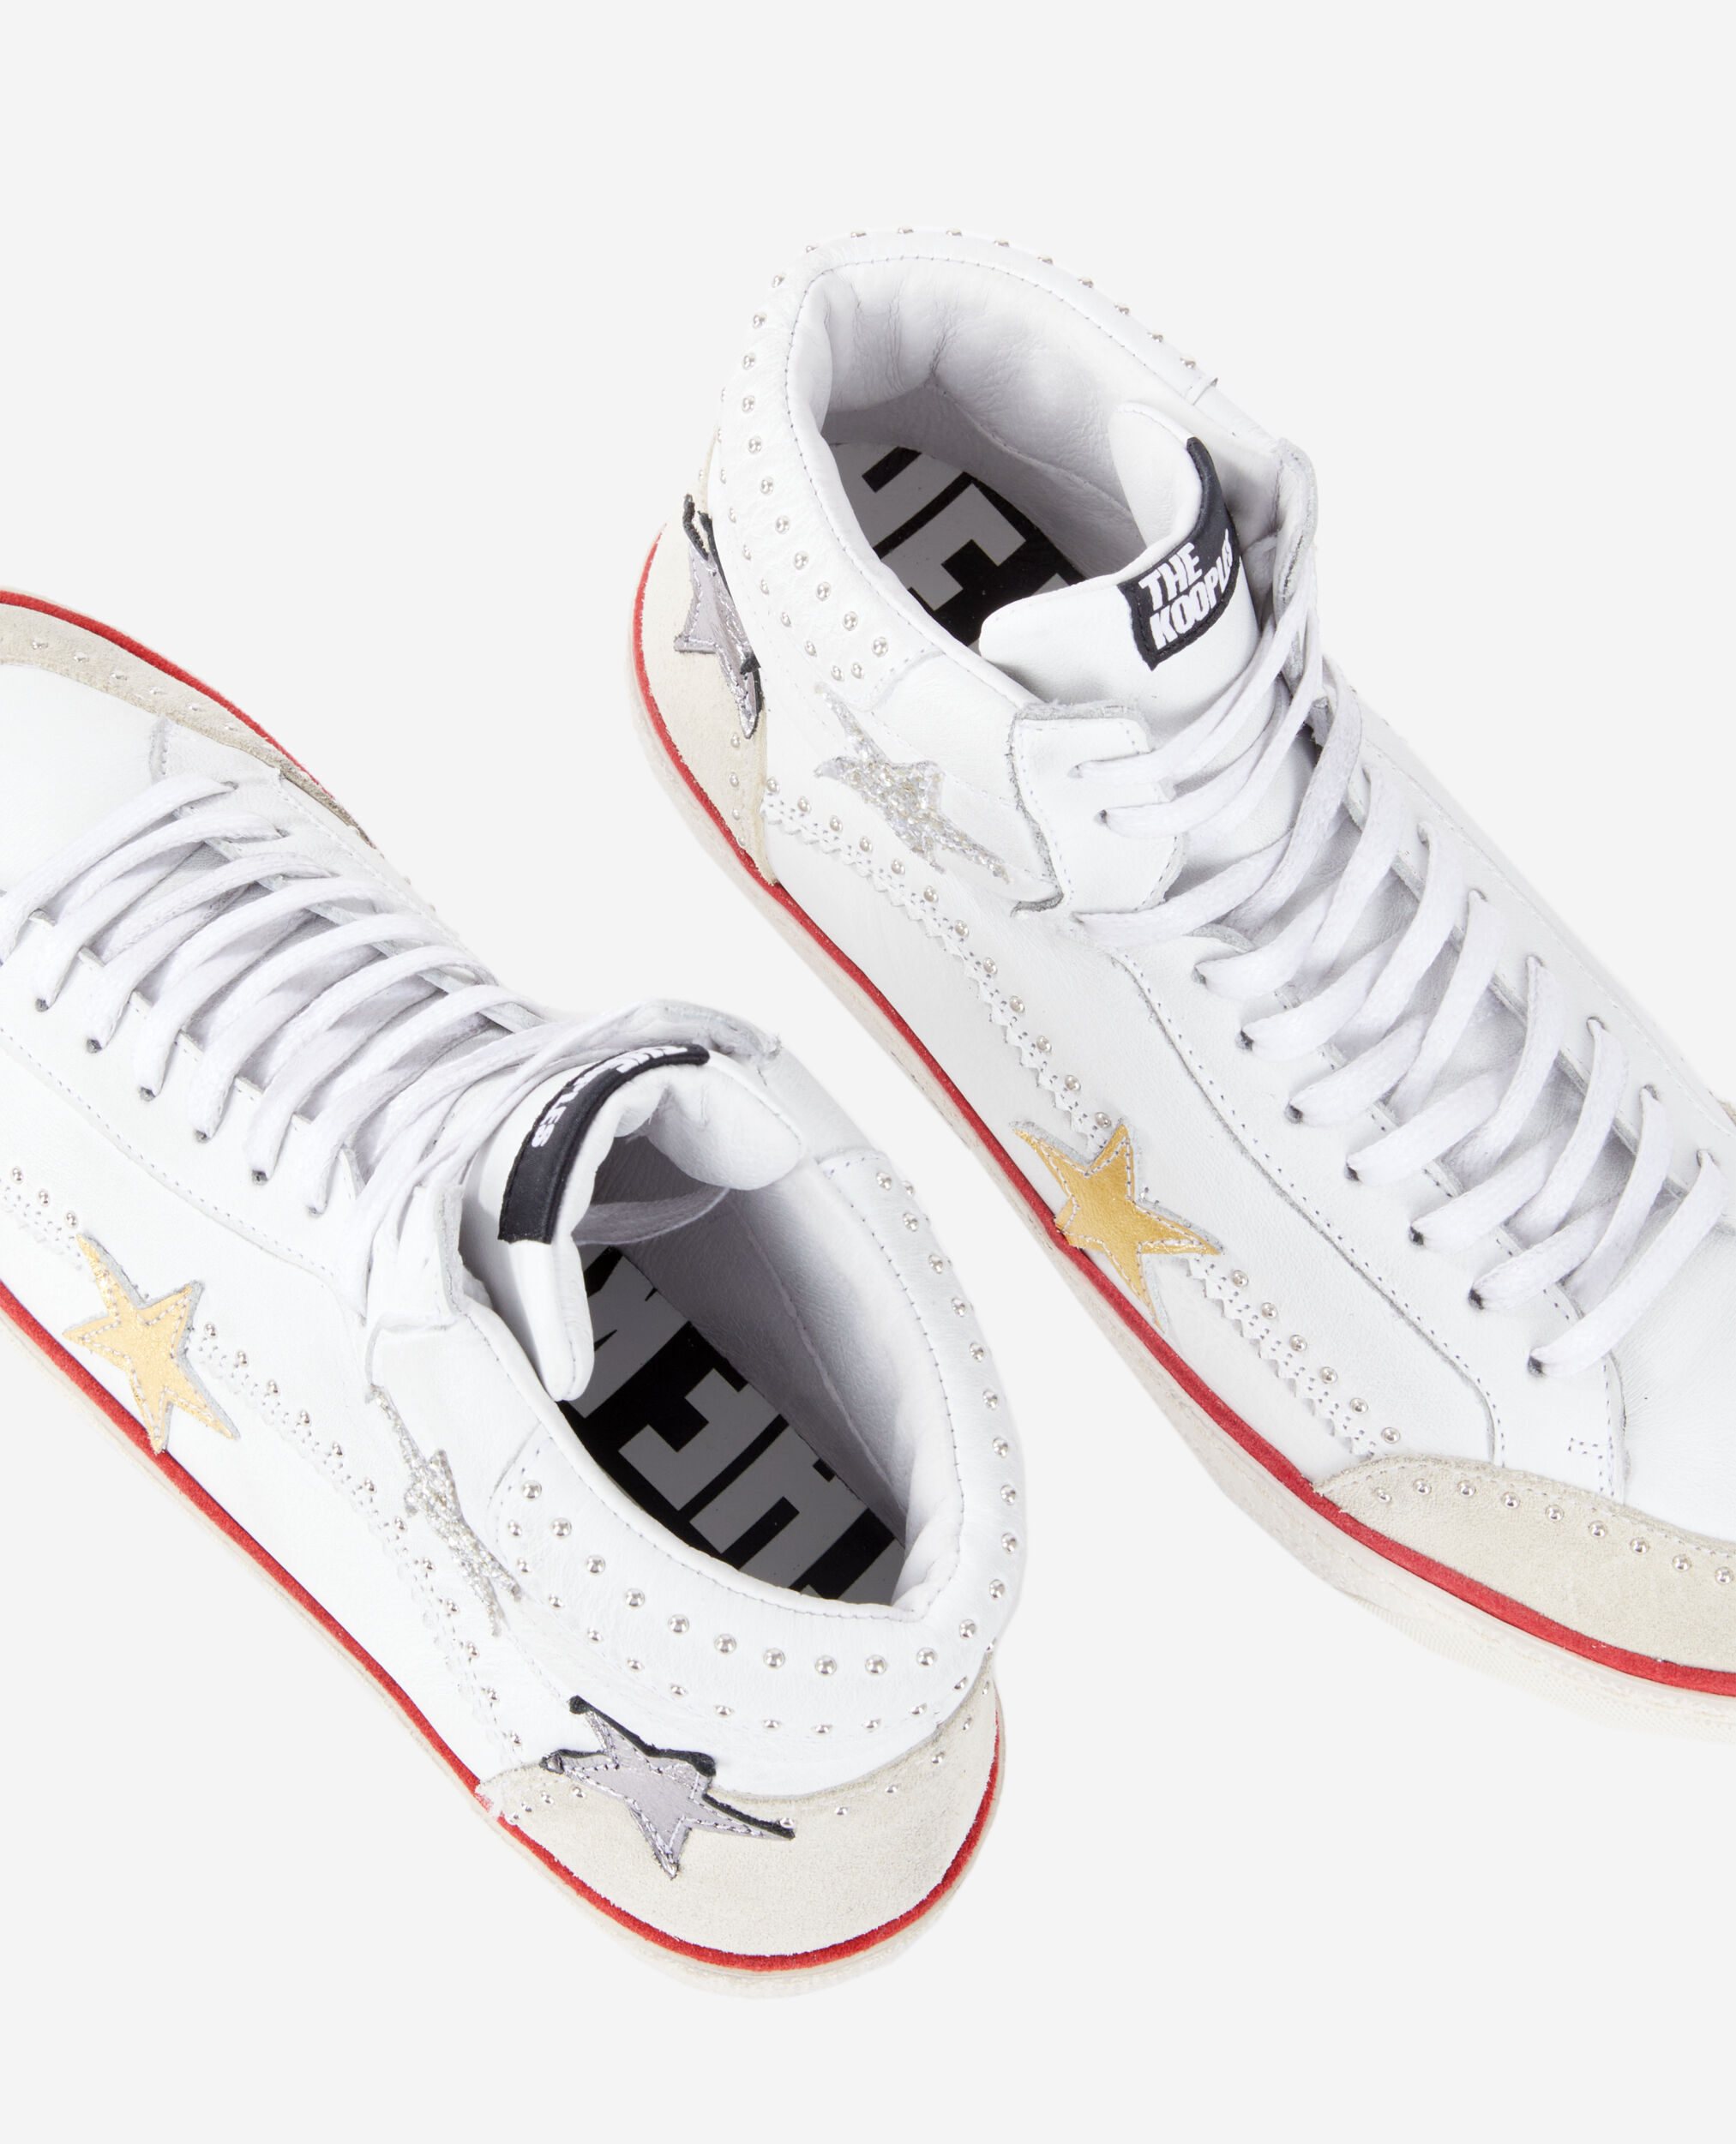 White leather high-top sneakers with stars, WHITE, hi-res image number null